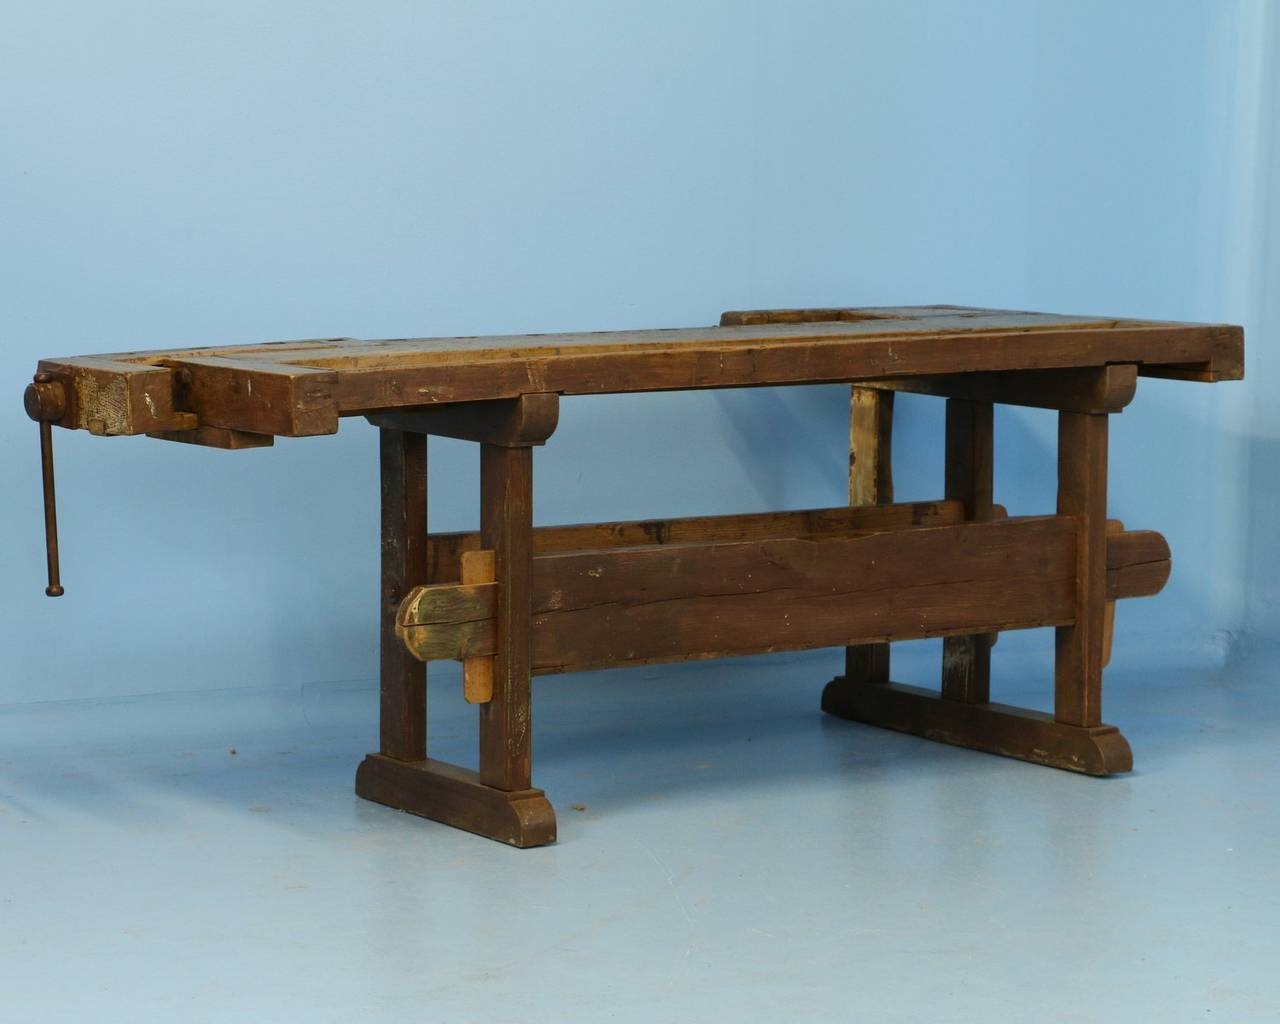 The warm patina on this workbench comes from the years of constant use, while the base still maintains an aged painted finish. It has two vices and a recessed tray where the carpenter would lay his tools. Note the lower shelf that rests between the